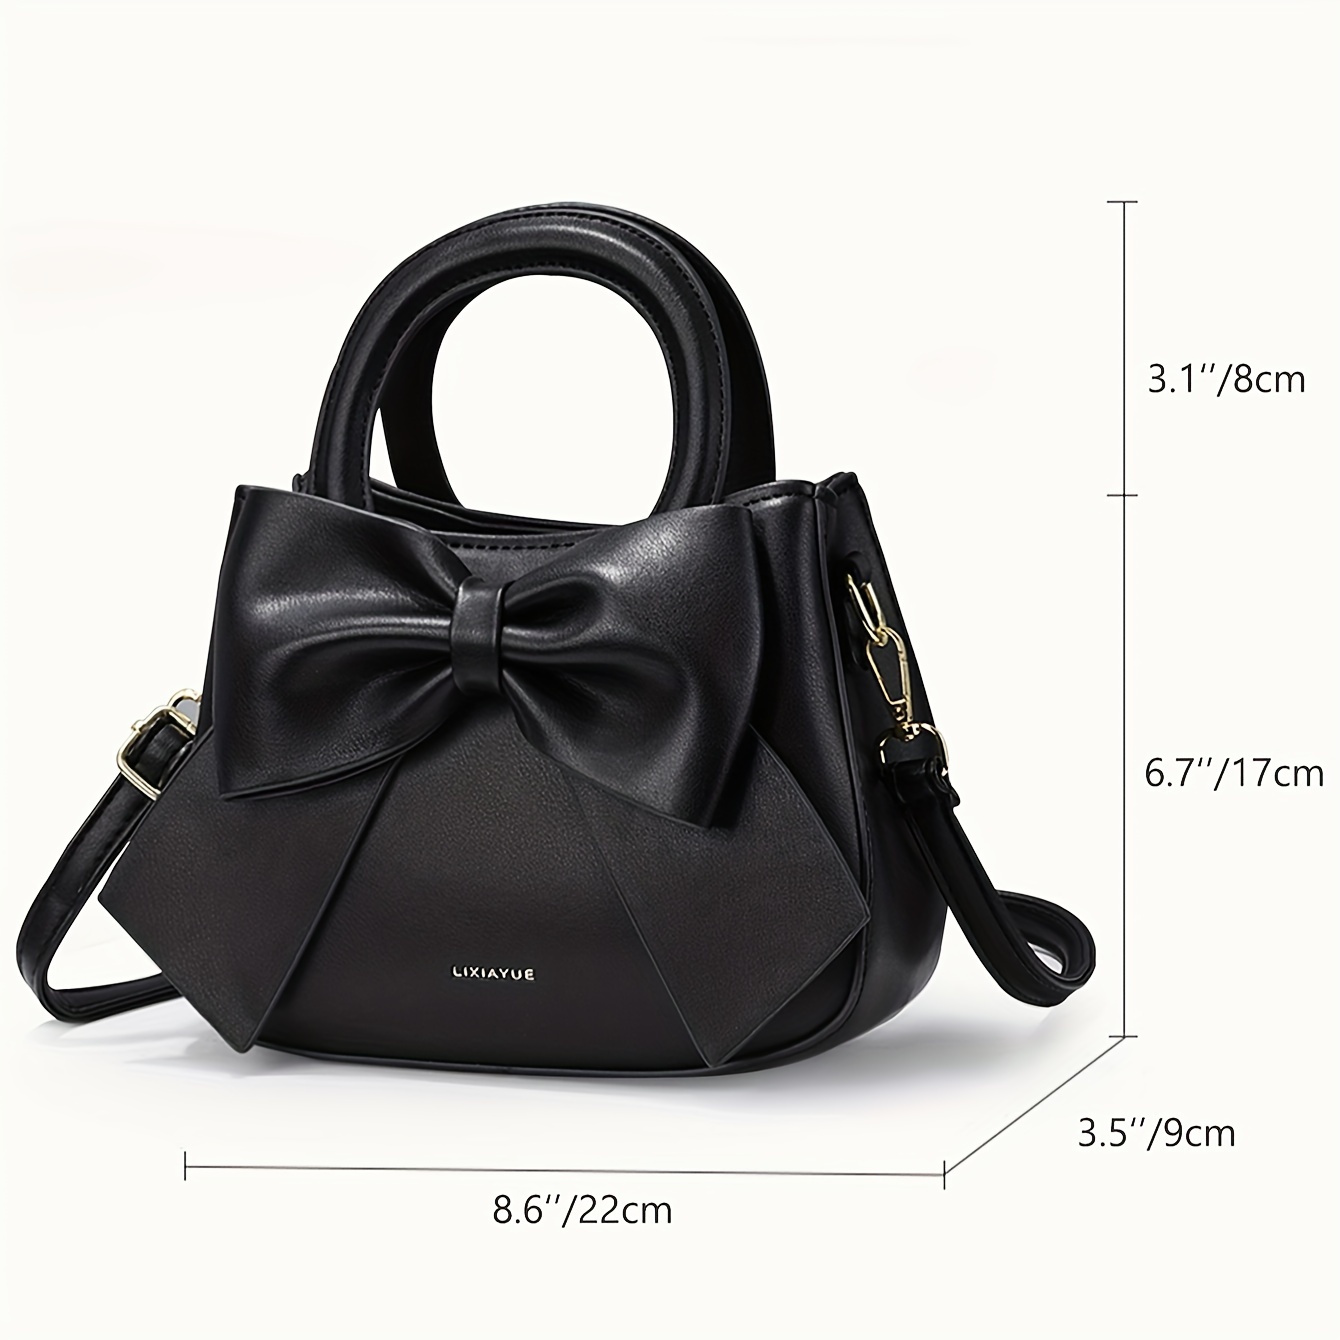 Evening Bags TOUTOU Stylish Girls Crossbody Bag With Bowtie Handle Purse  Shoulder Strap Versatile And Cute Handbag For Daily Use From Diyplant,  $38.23